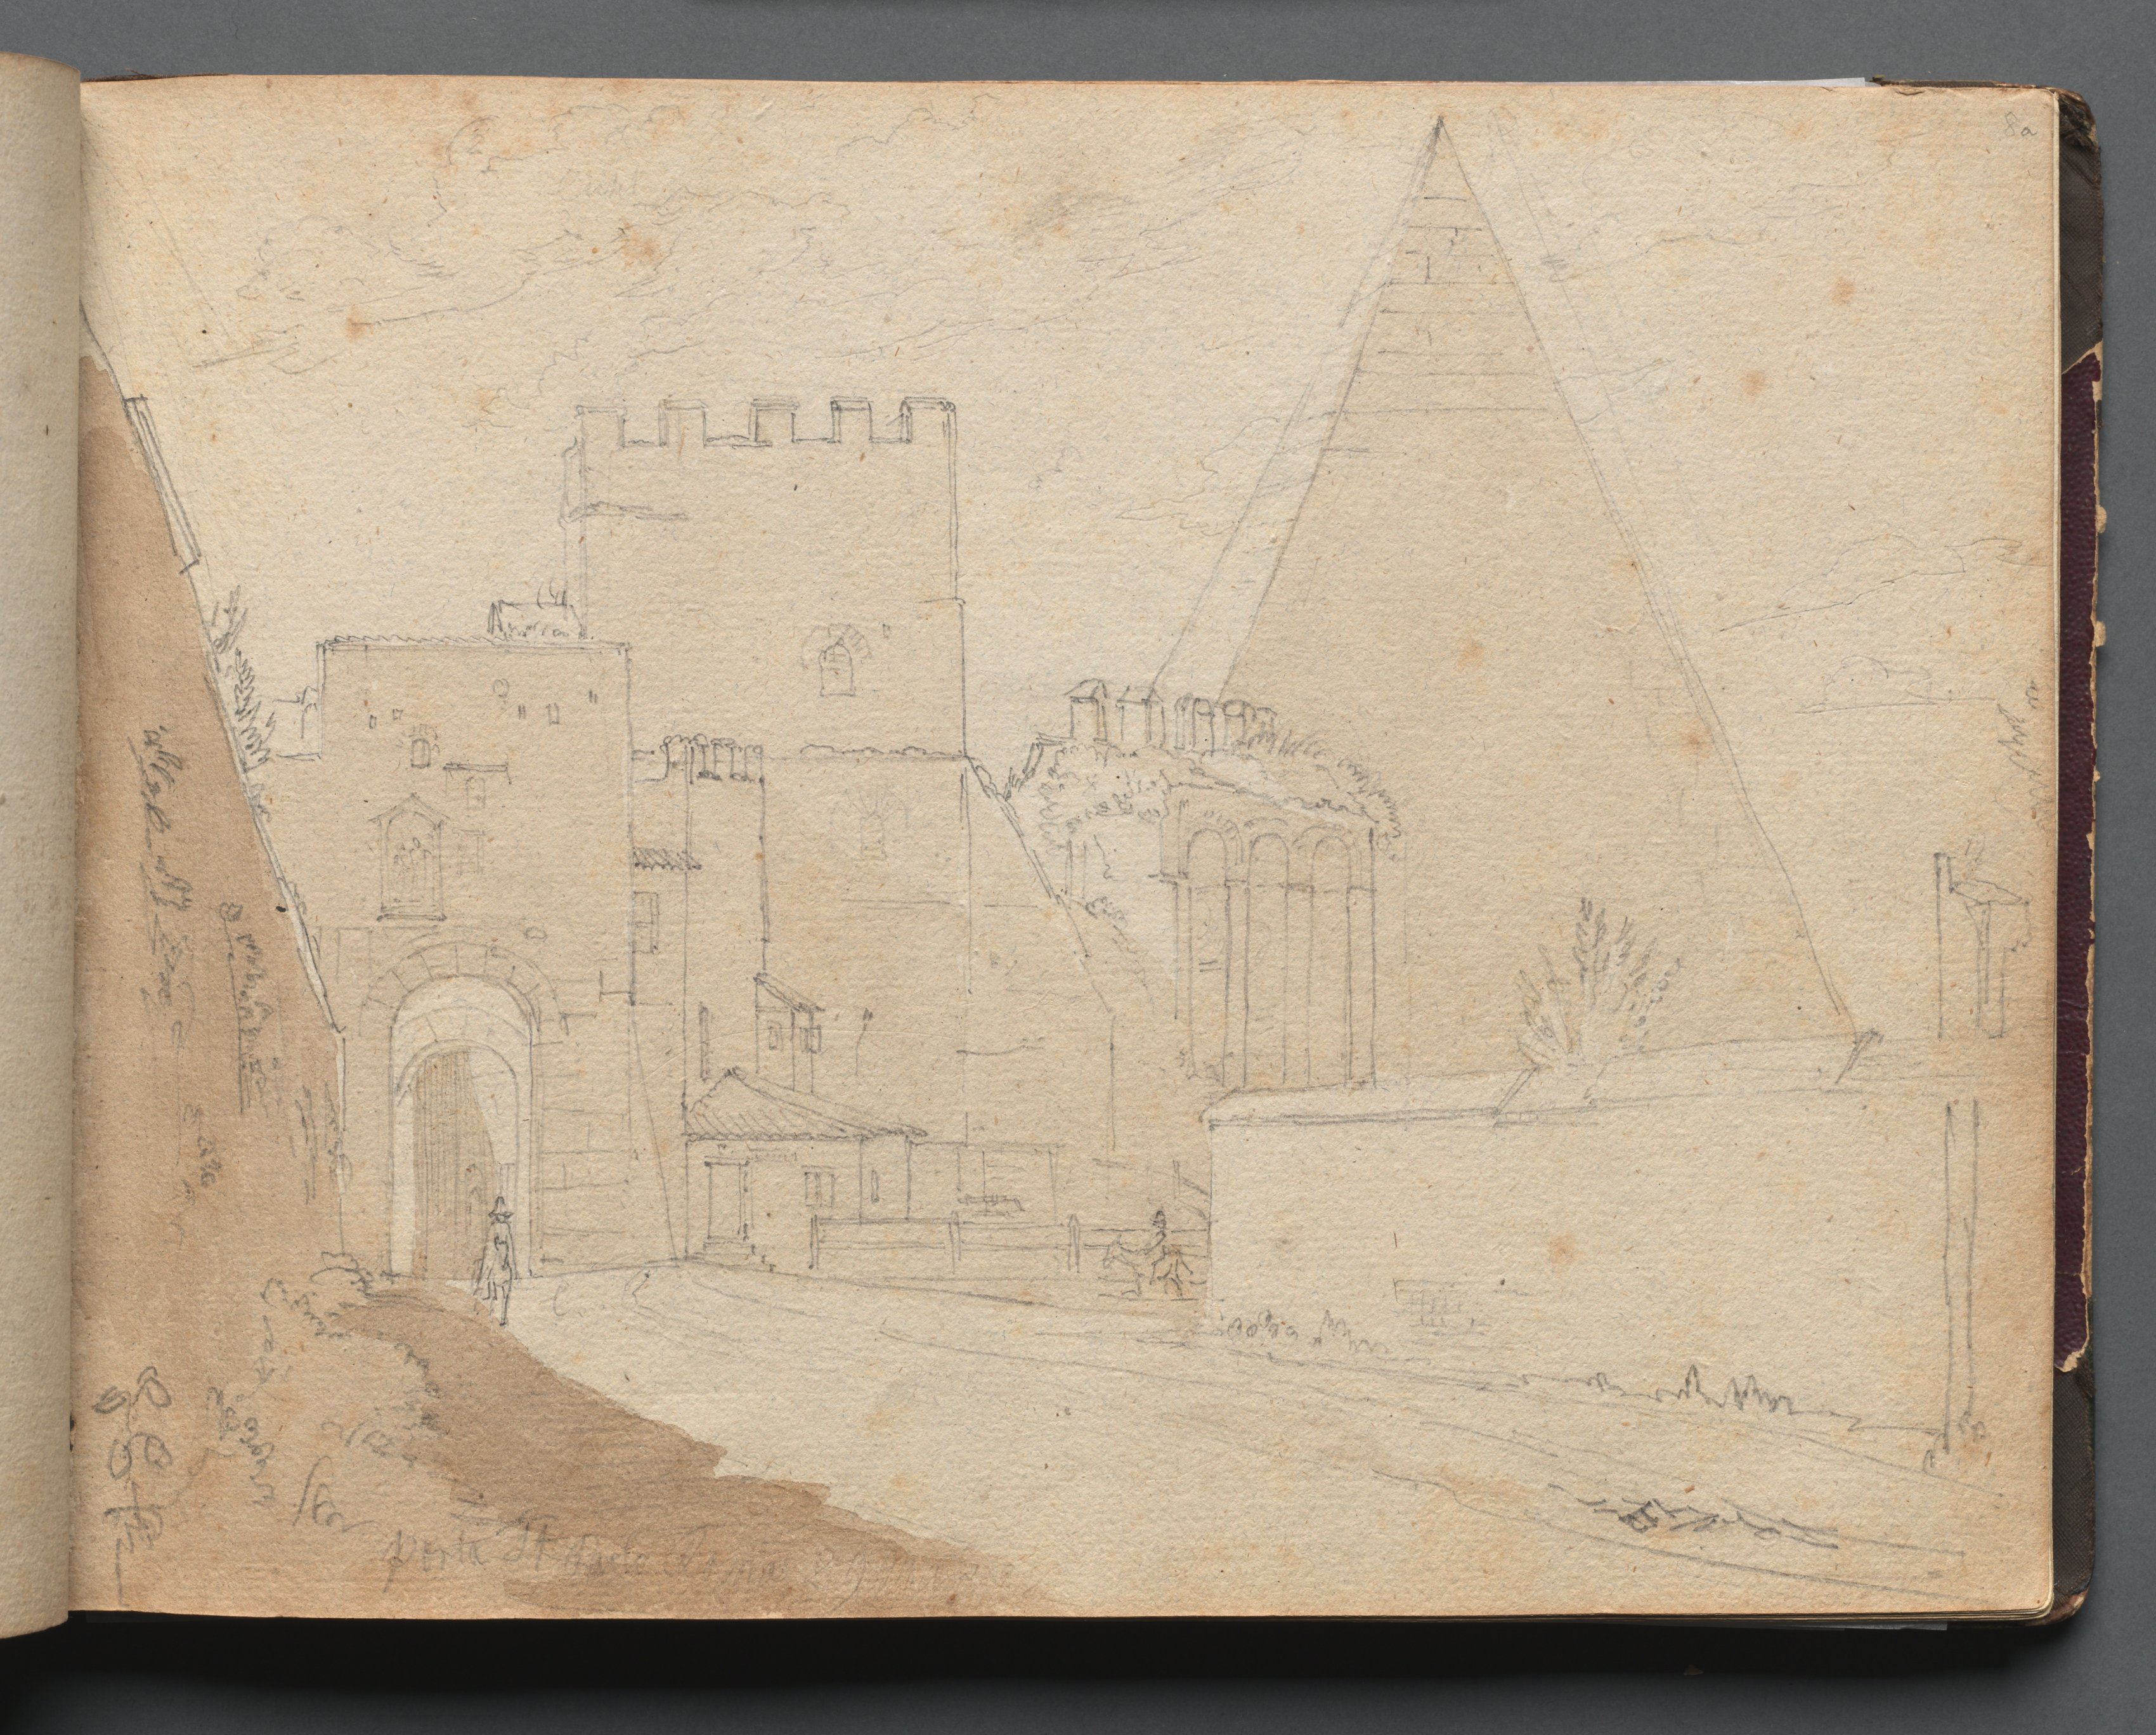 Album with Views of Rome and Surroundings, Landscape Studies, page 08a: "Porta St. Paolo"